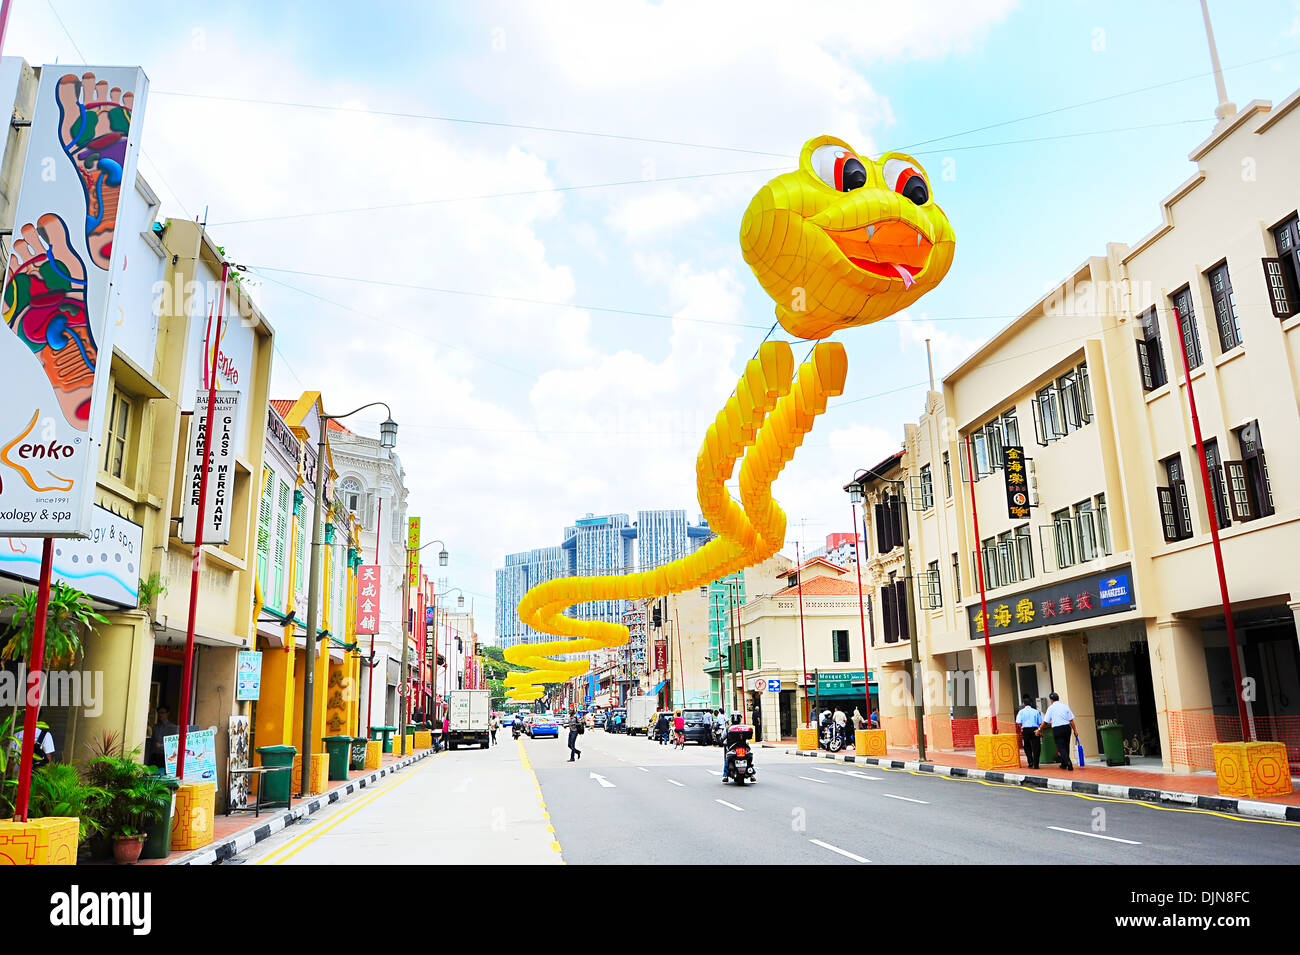 Chinatown street at day in Singapore. Stock Photo